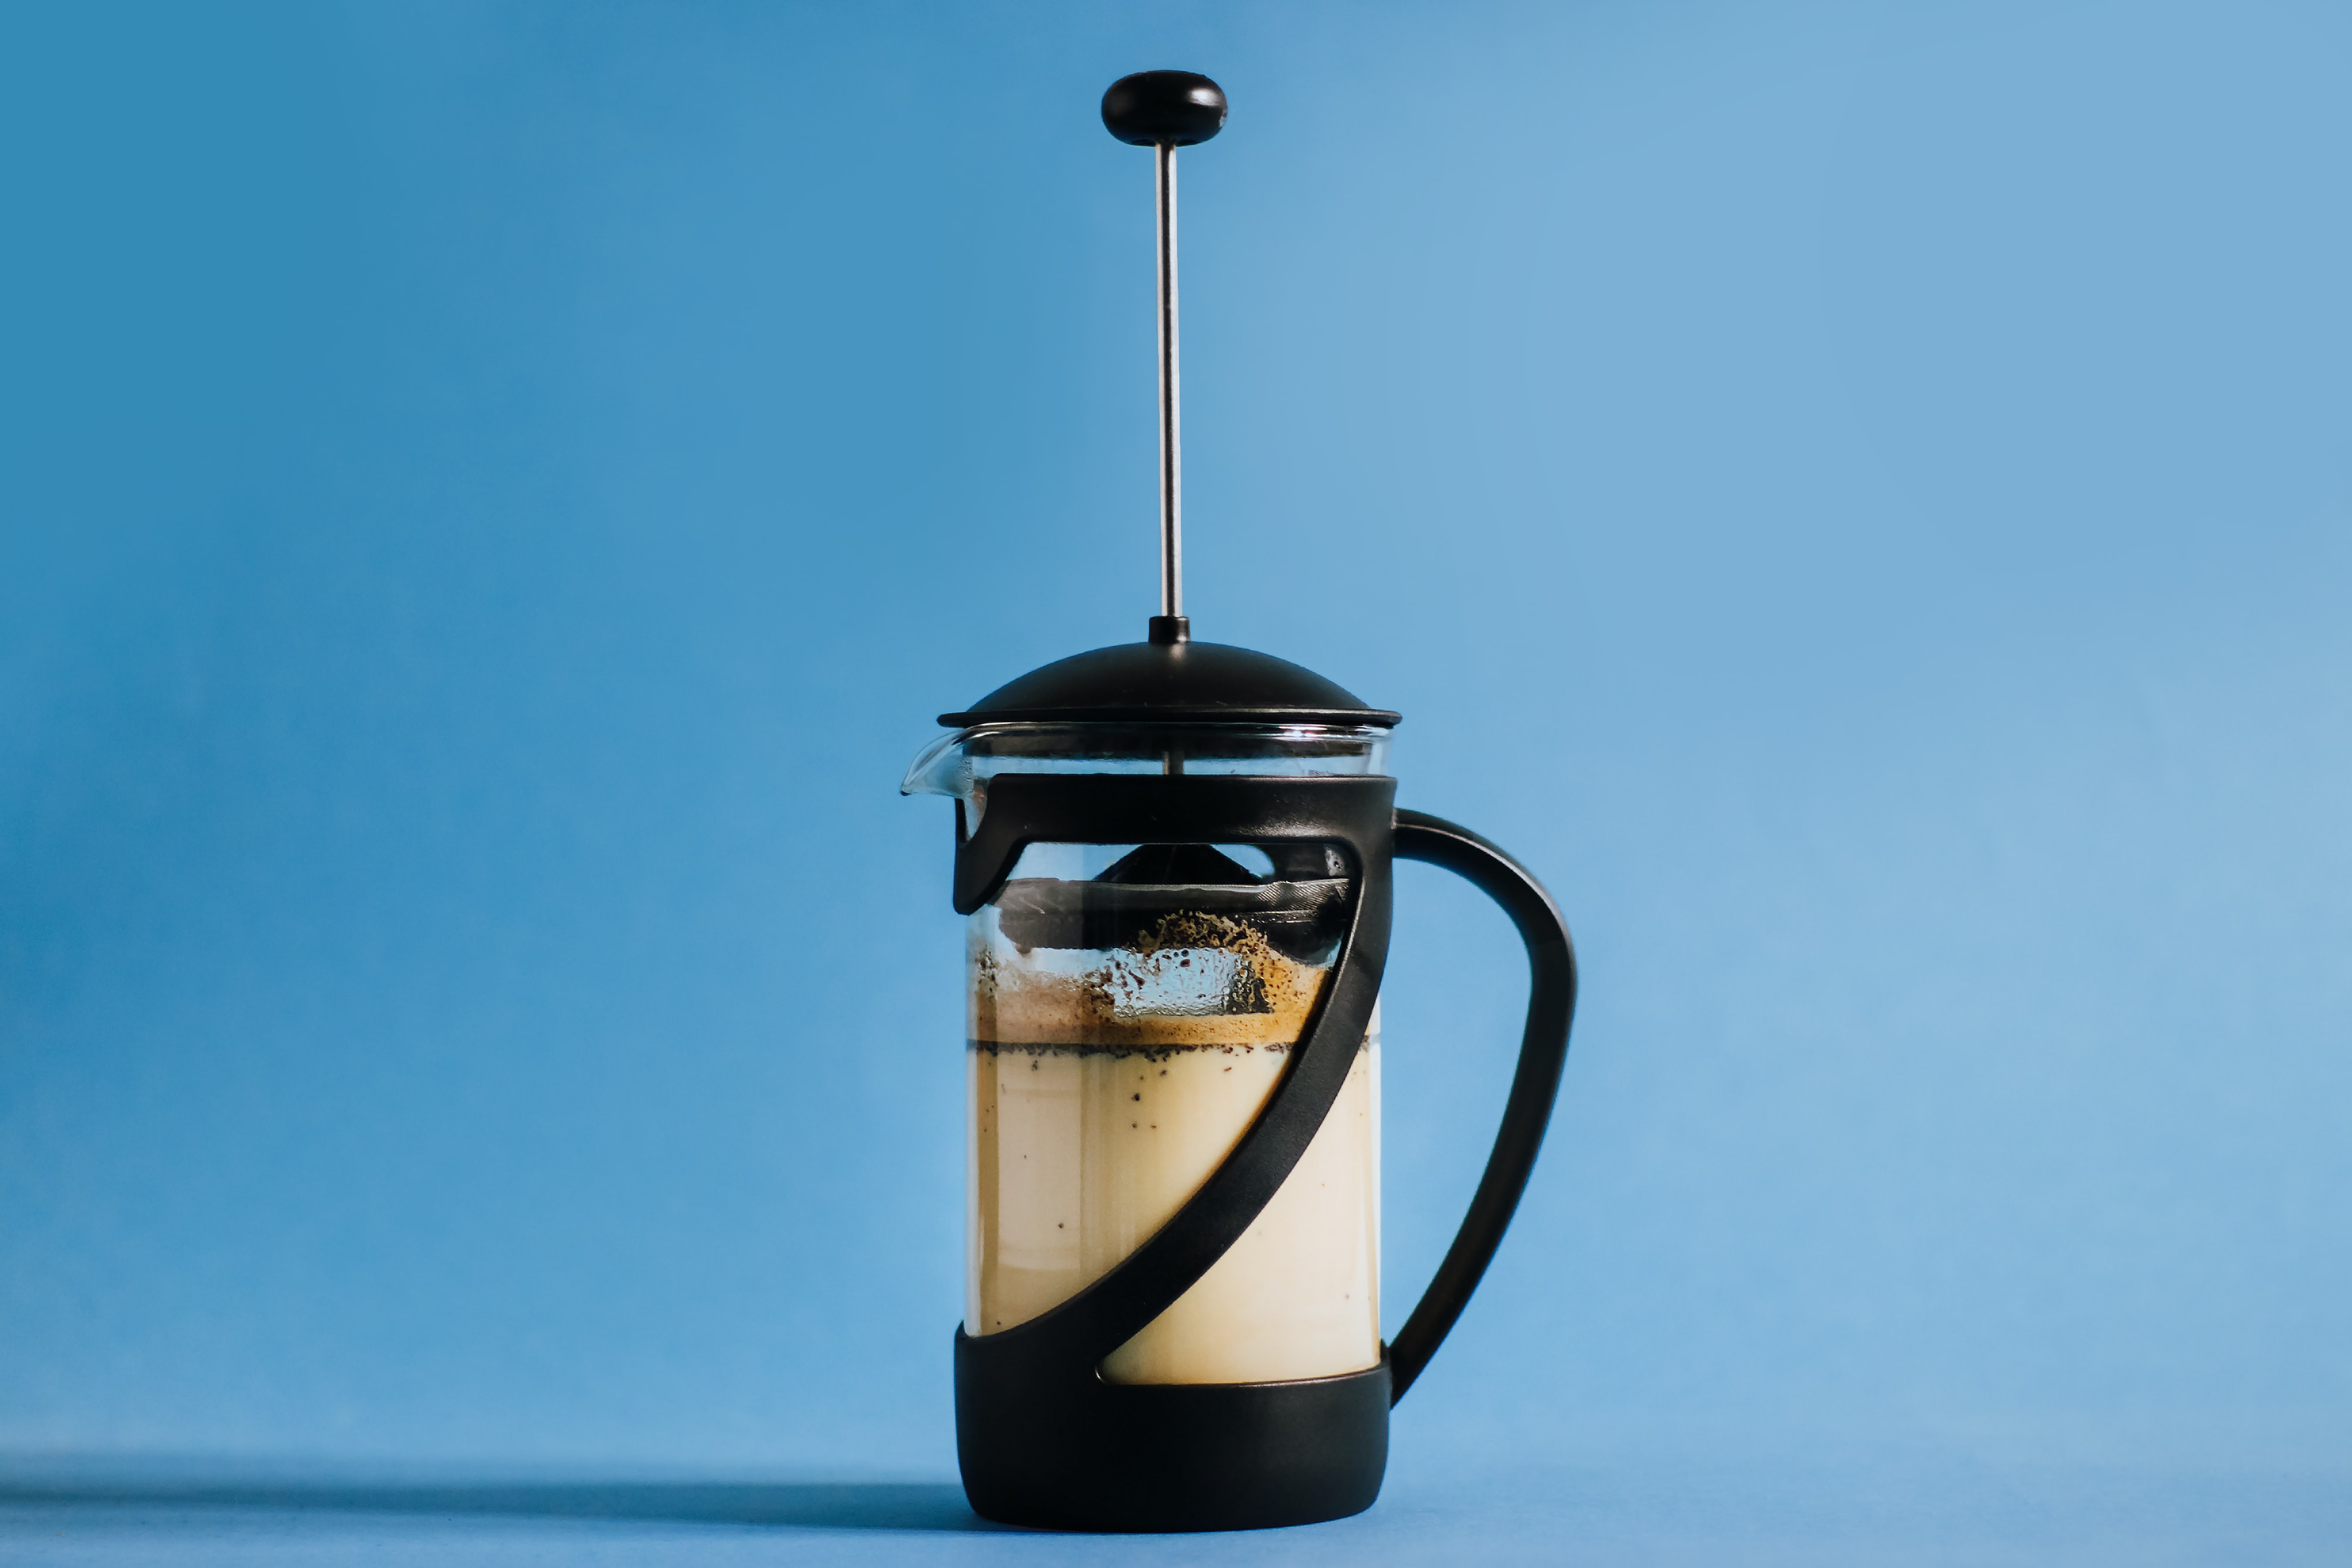 The Wild and Wacky Life of a French Press's featured image